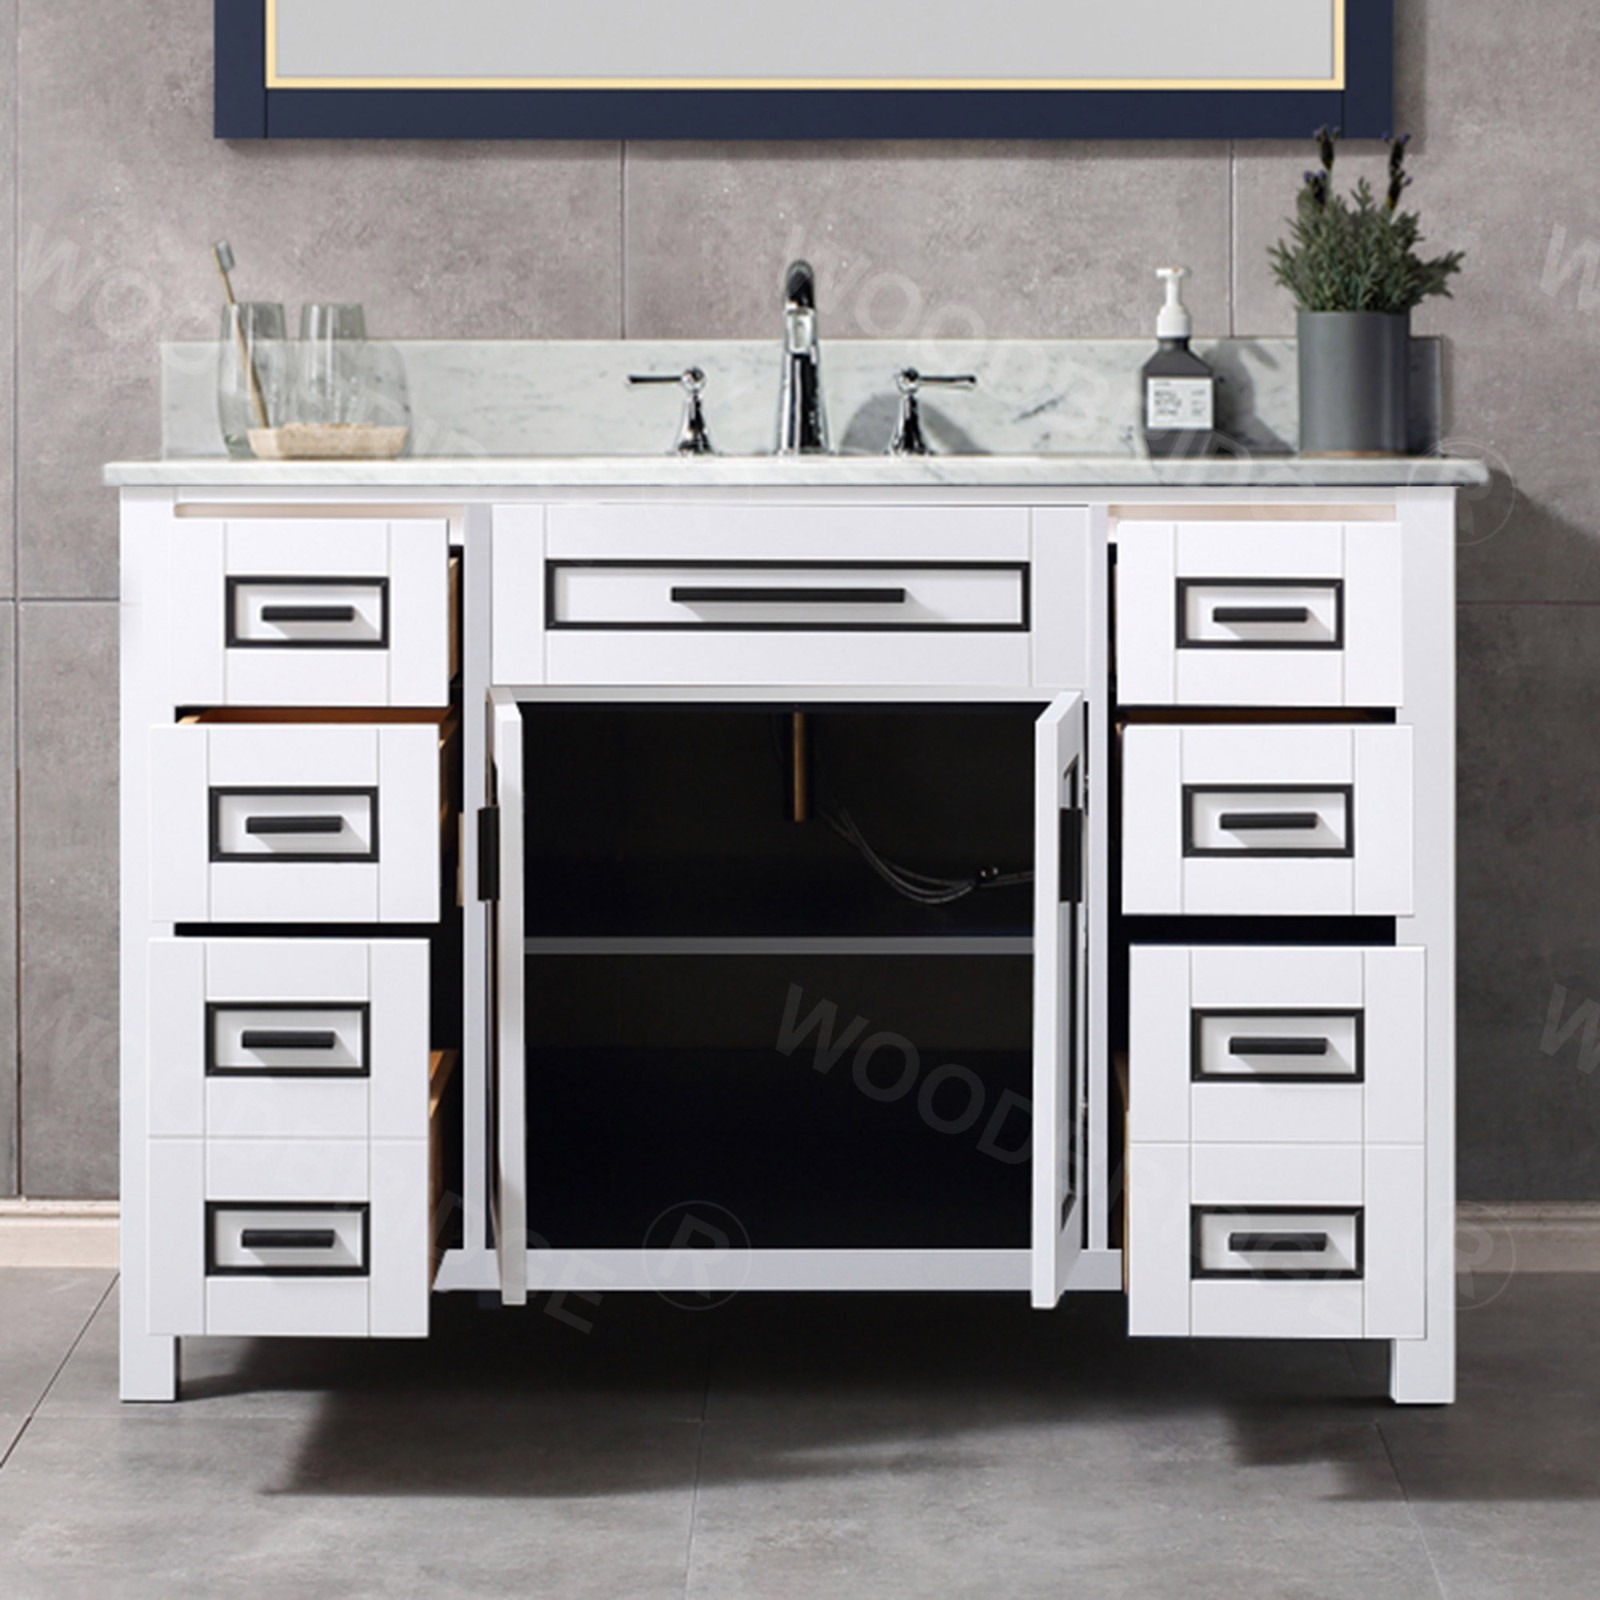  WOODBRIDGE Milan  49” Floor Mounted Single Basin Vanity Set with Solid Wood Cabinet in White, and Carrara White Marble Vanity Top with Pre-installed Undermount Rectangle Bathroom Sink in White, Pre-Drilled 3-Hole for 4-inch Centerset Faucet_4699